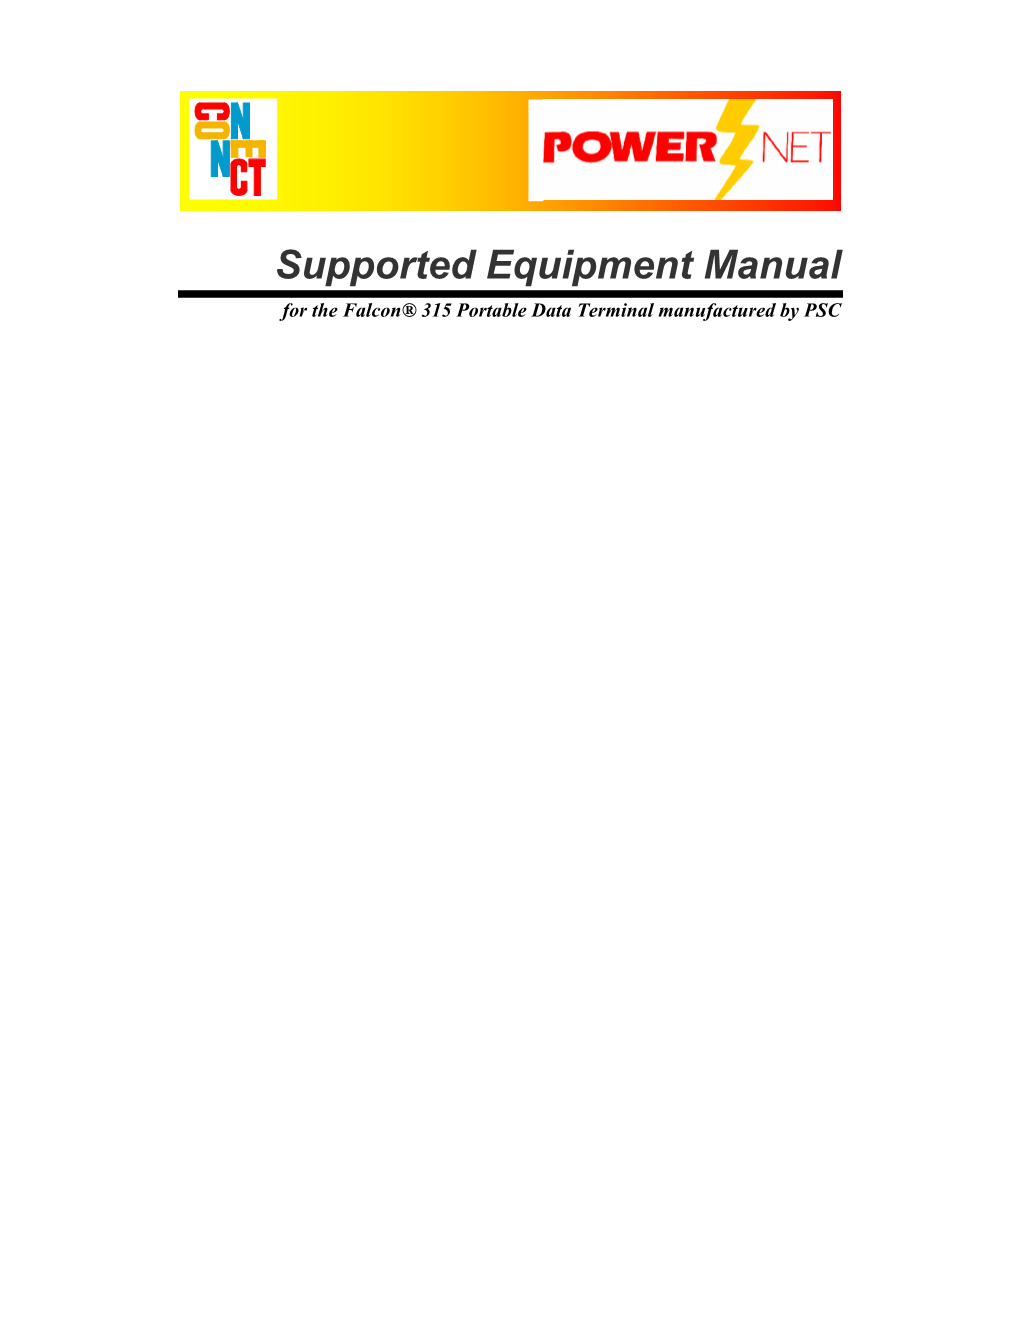 Supported Equipment Manual for the Falcon® 315 Portable Data Terminal Manufactured by PSC